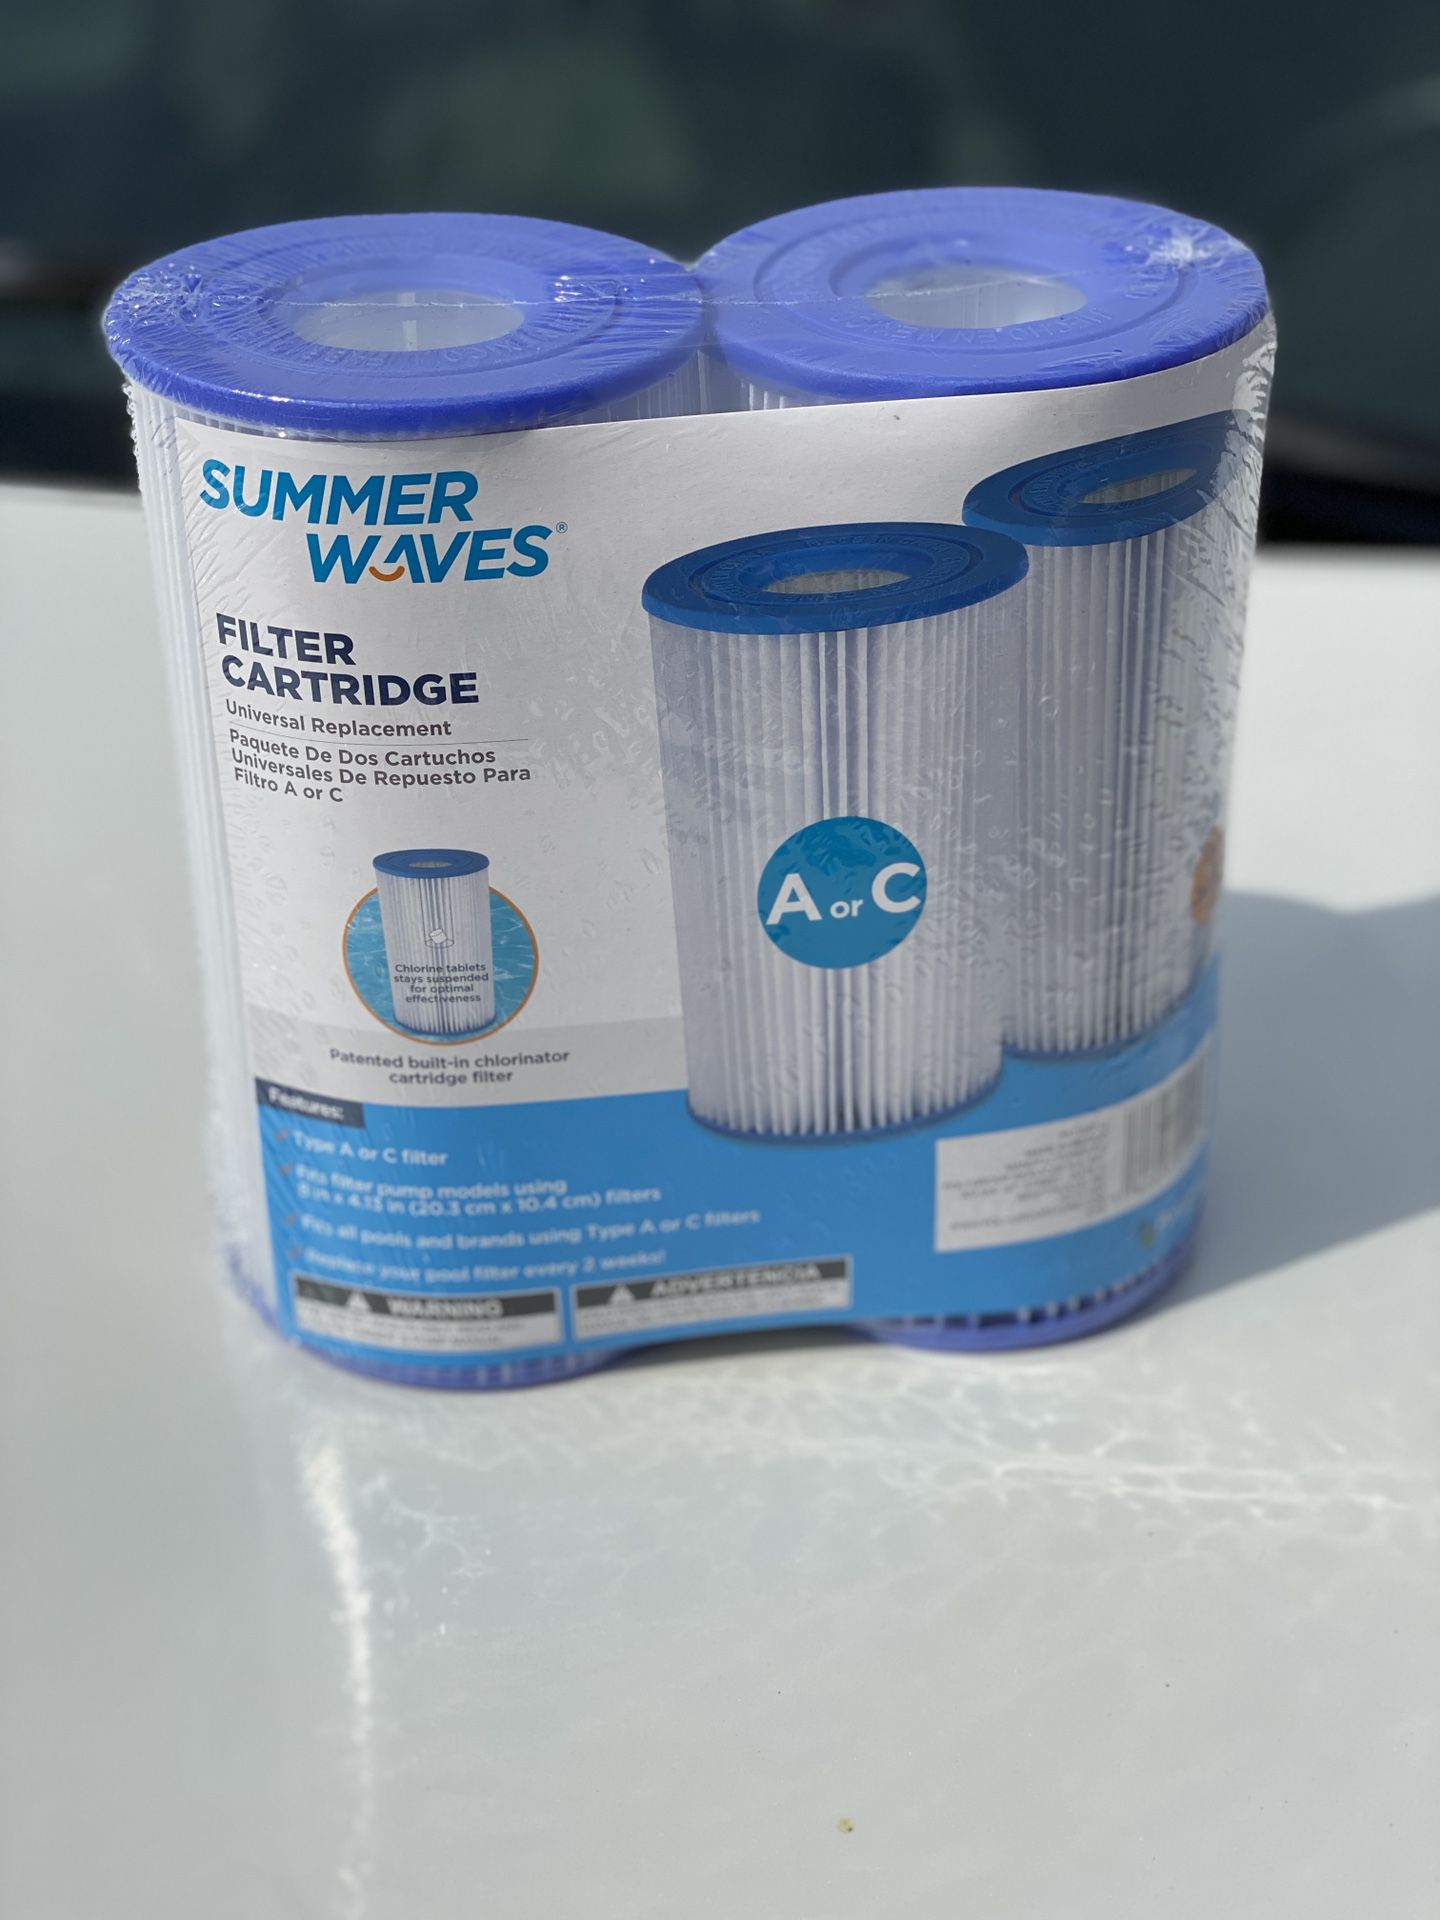 Summer Waves Pool Filter A/C 2 pack